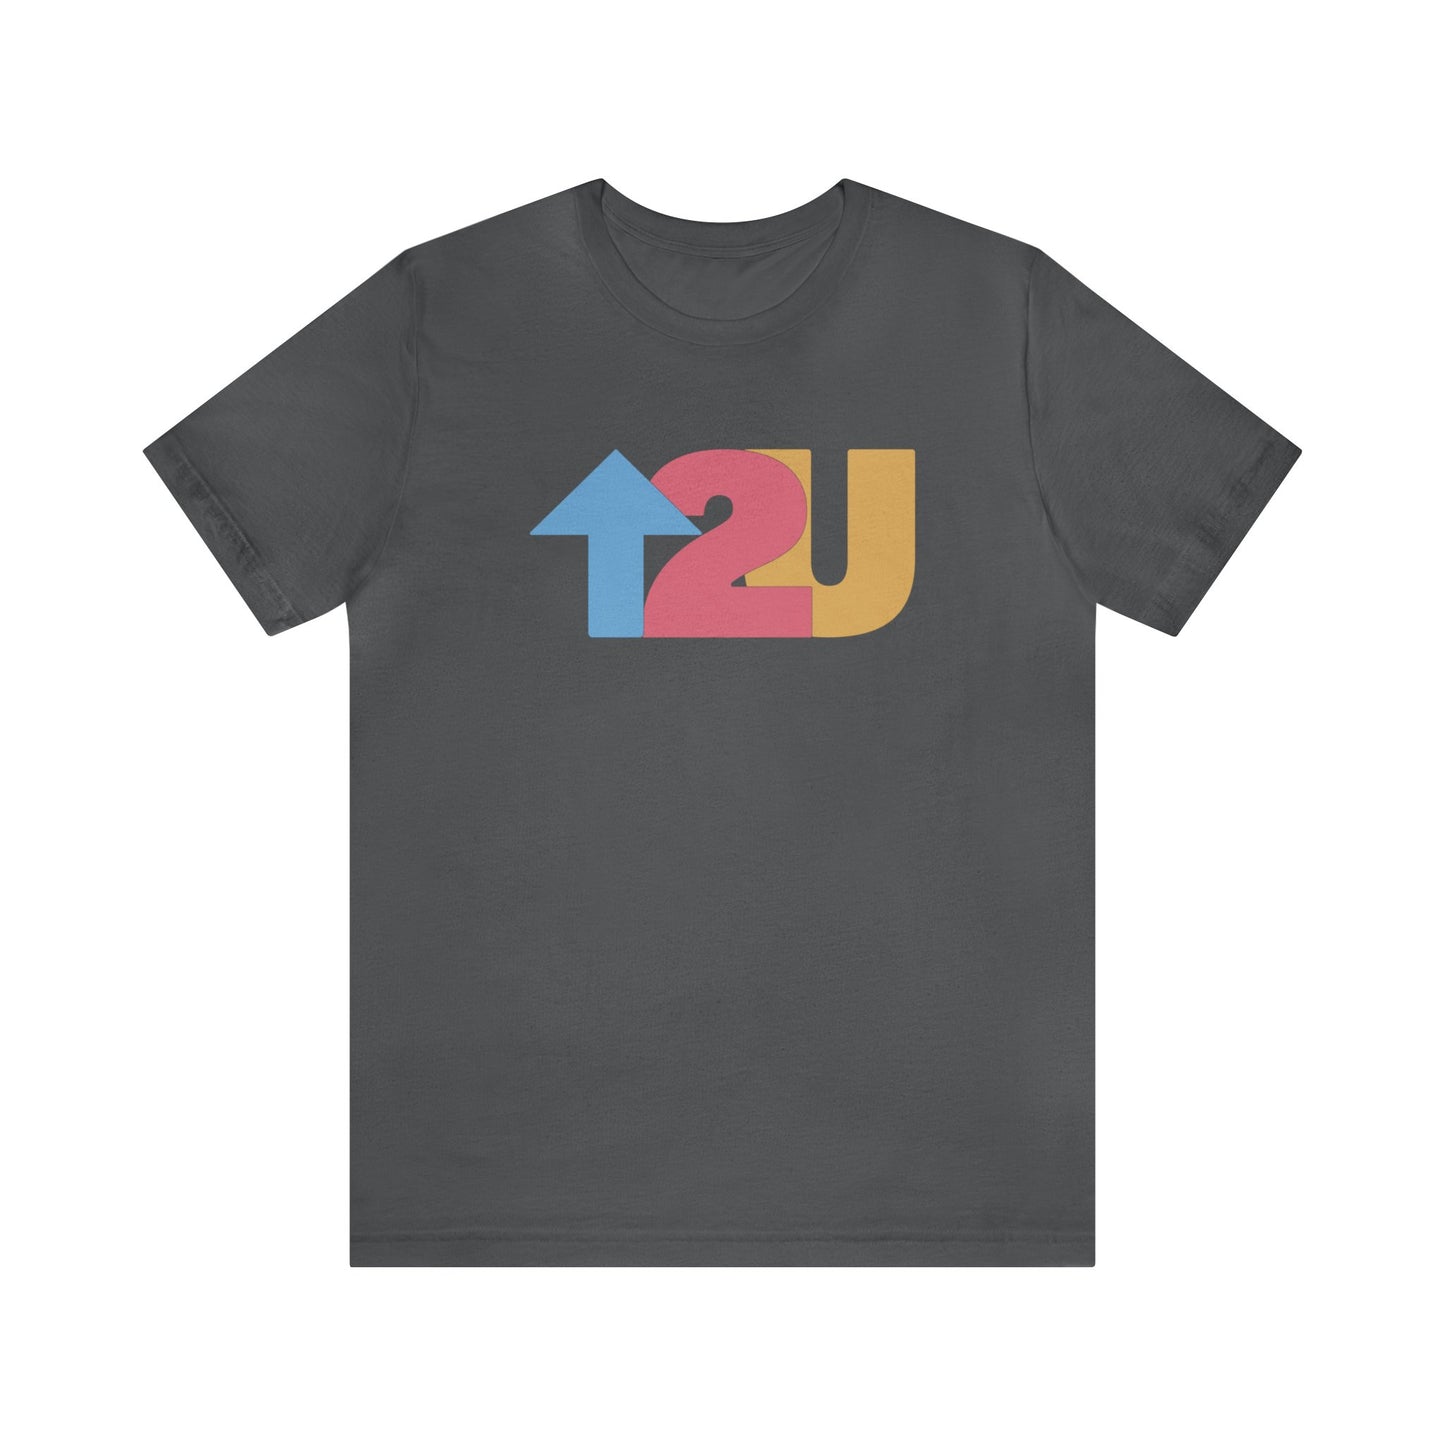 Up To You - Unisex T-Shirt